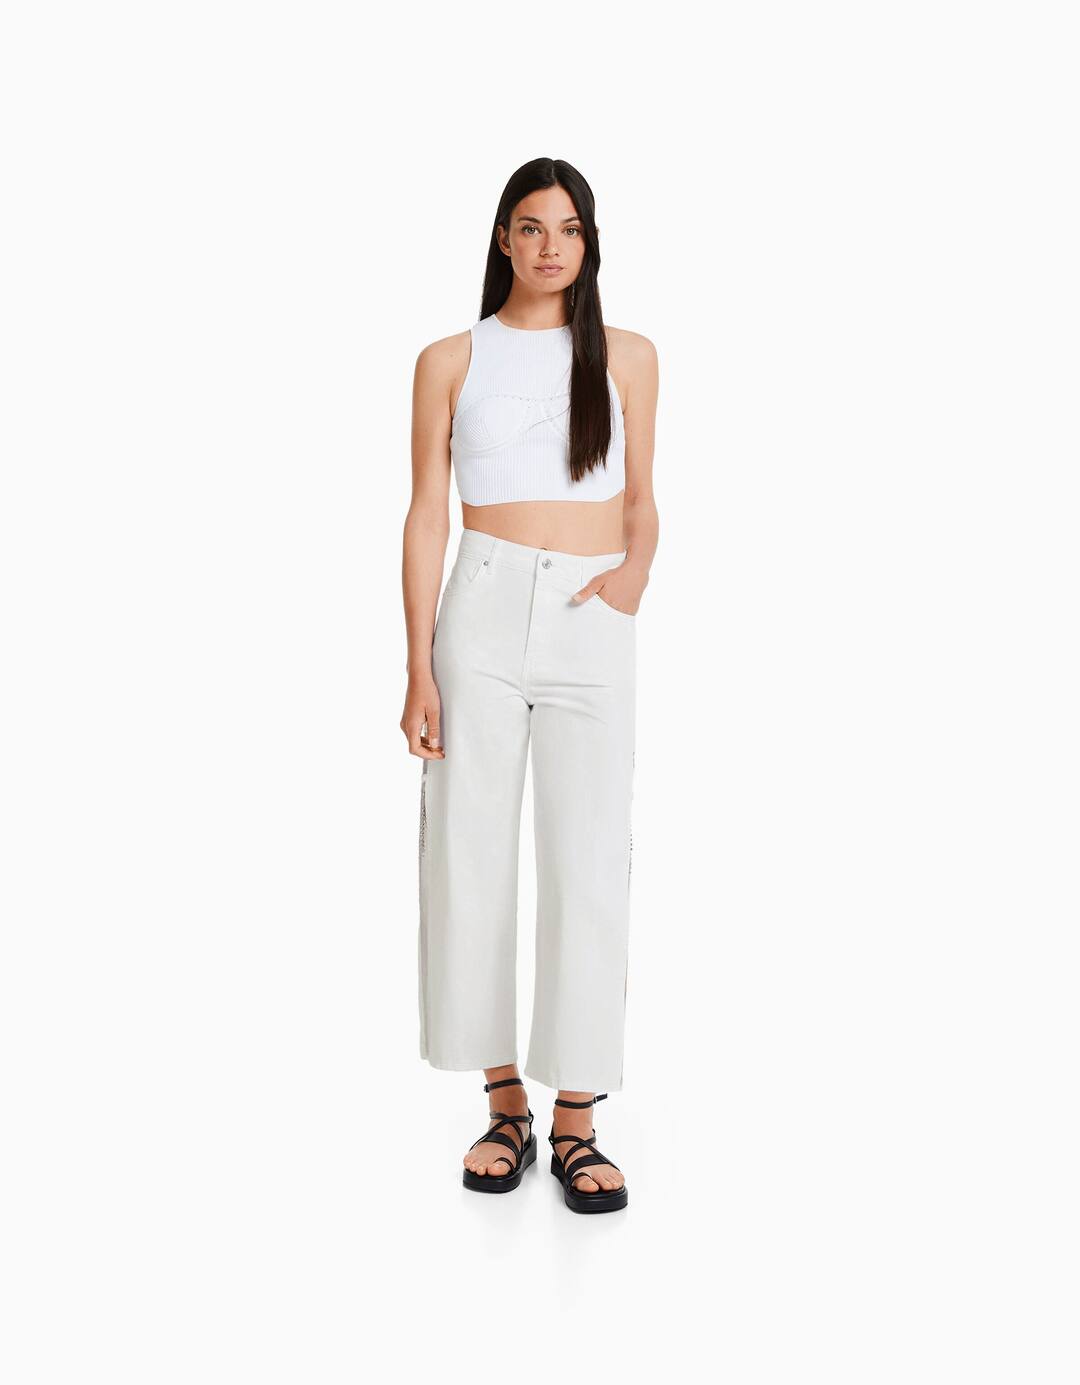 Culotte jeans with side split and heart detail